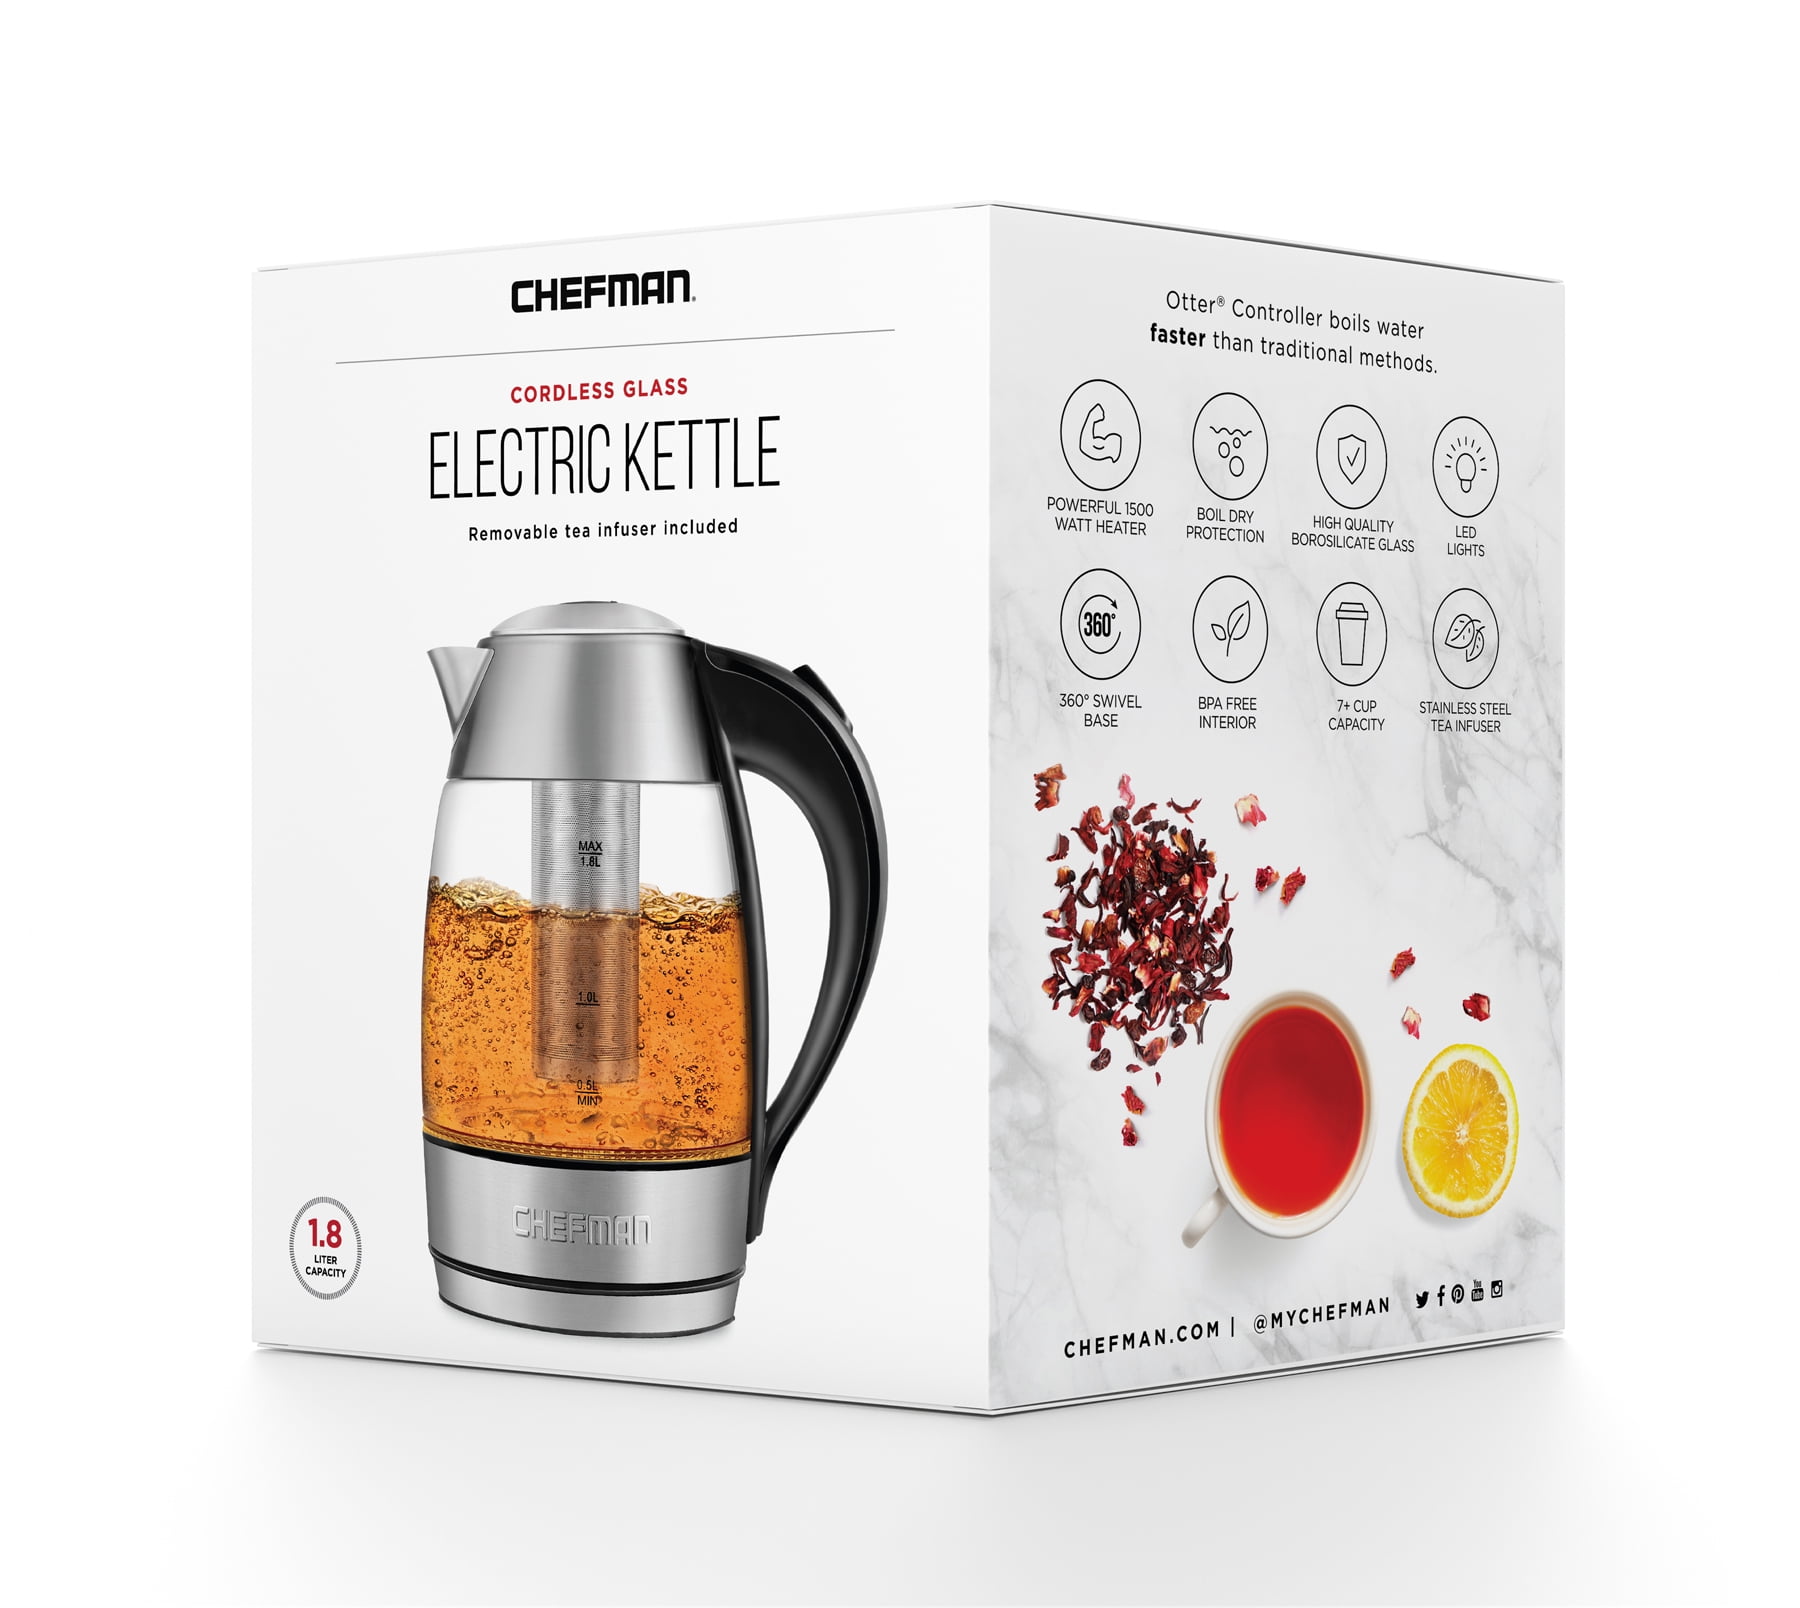 Chefman Electric Kettle with Temperature Control, 5 Presets LED Indicator  Lights, Removable Tea Infuser, Glass Tea Kettle & Hot Water Boiler, 360°